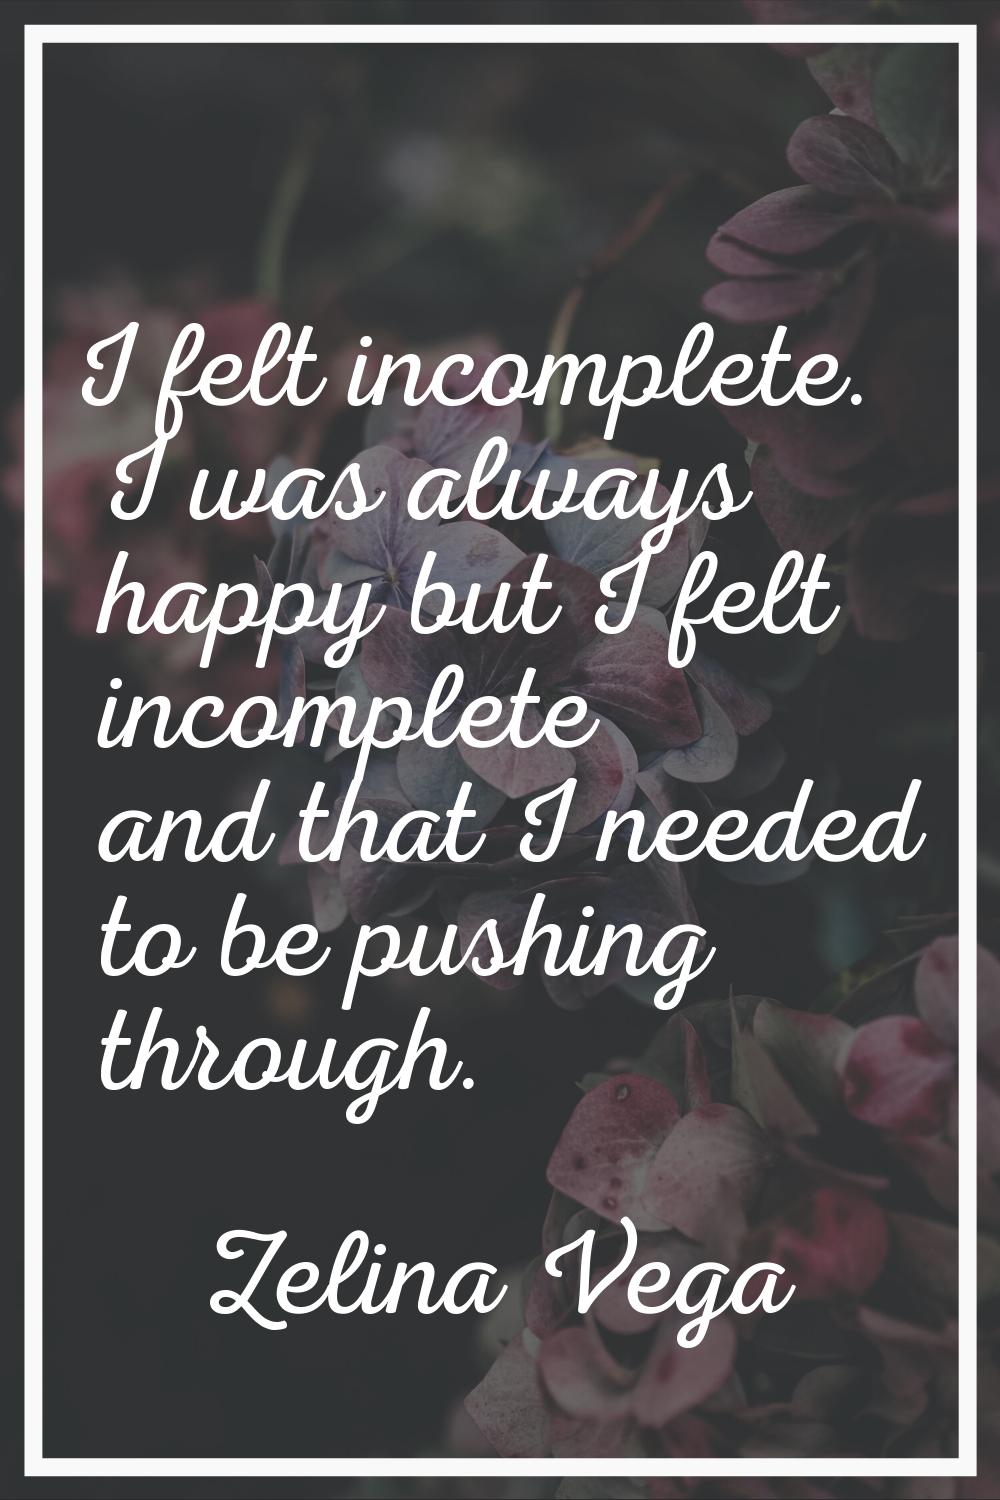 I felt incomplete. I was always happy but I felt incomplete and that I needed to be pushing through